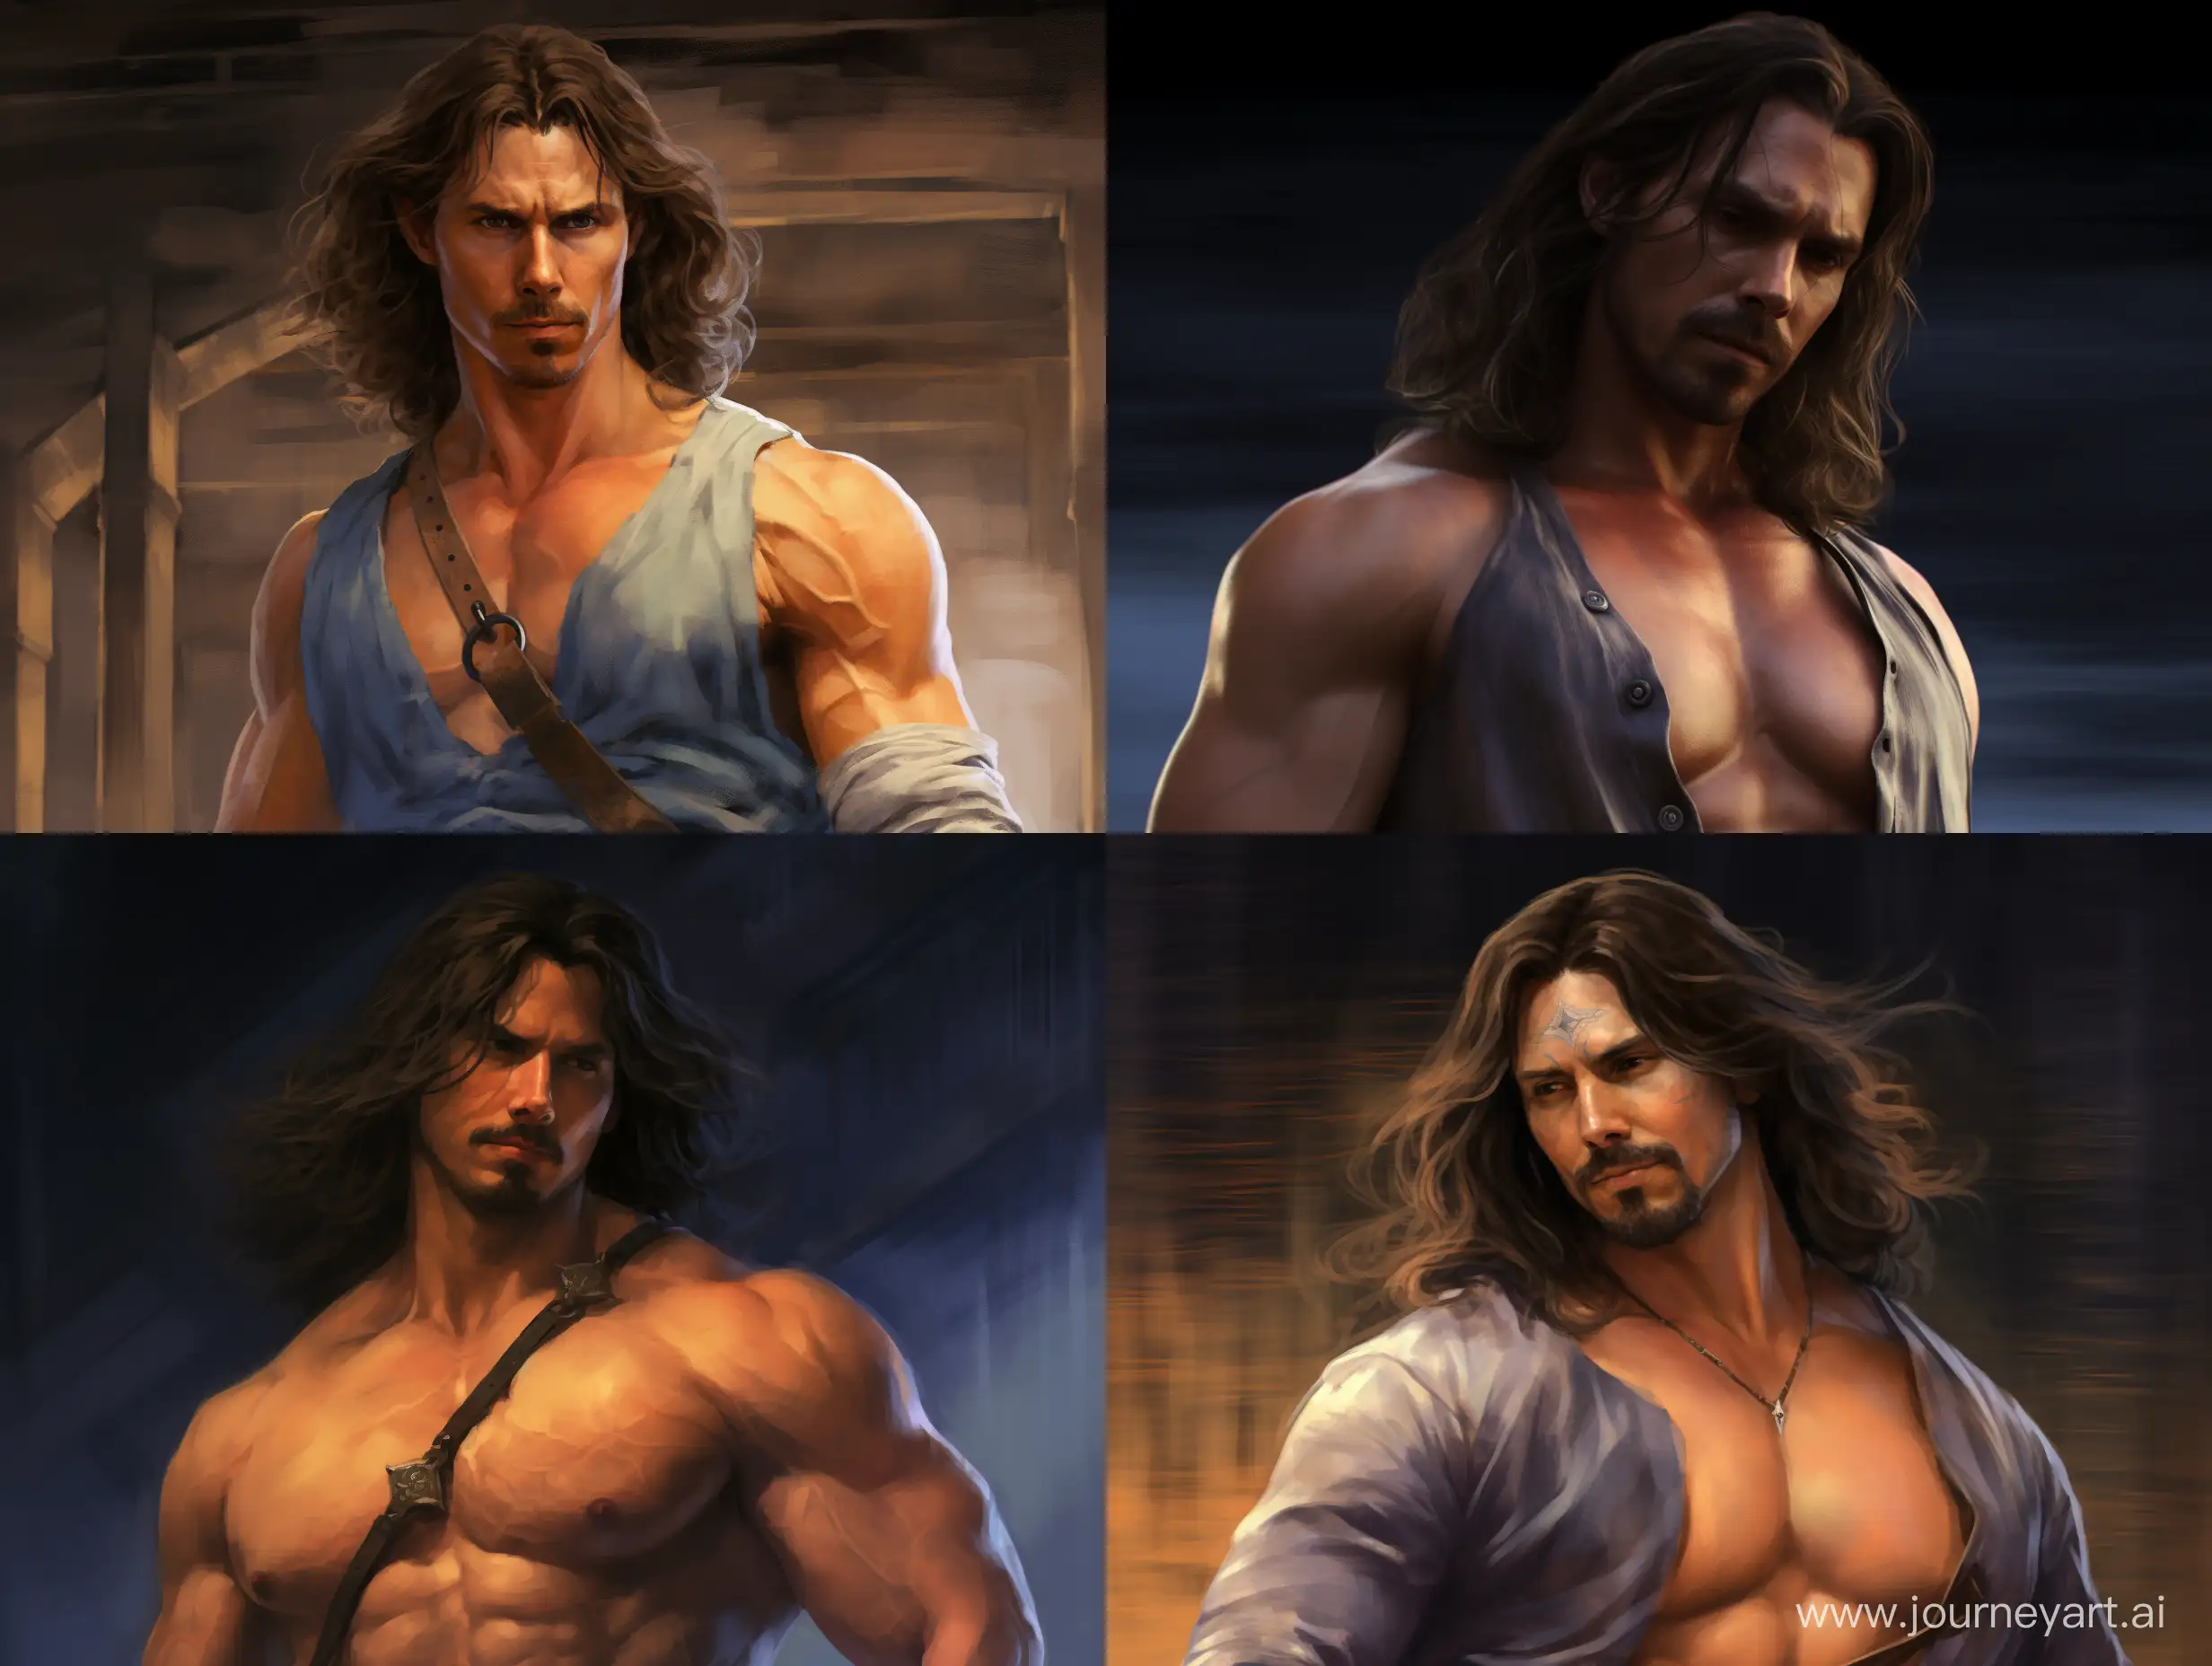 Realistic picture of 
Doctor Strange with long hair and shirtless